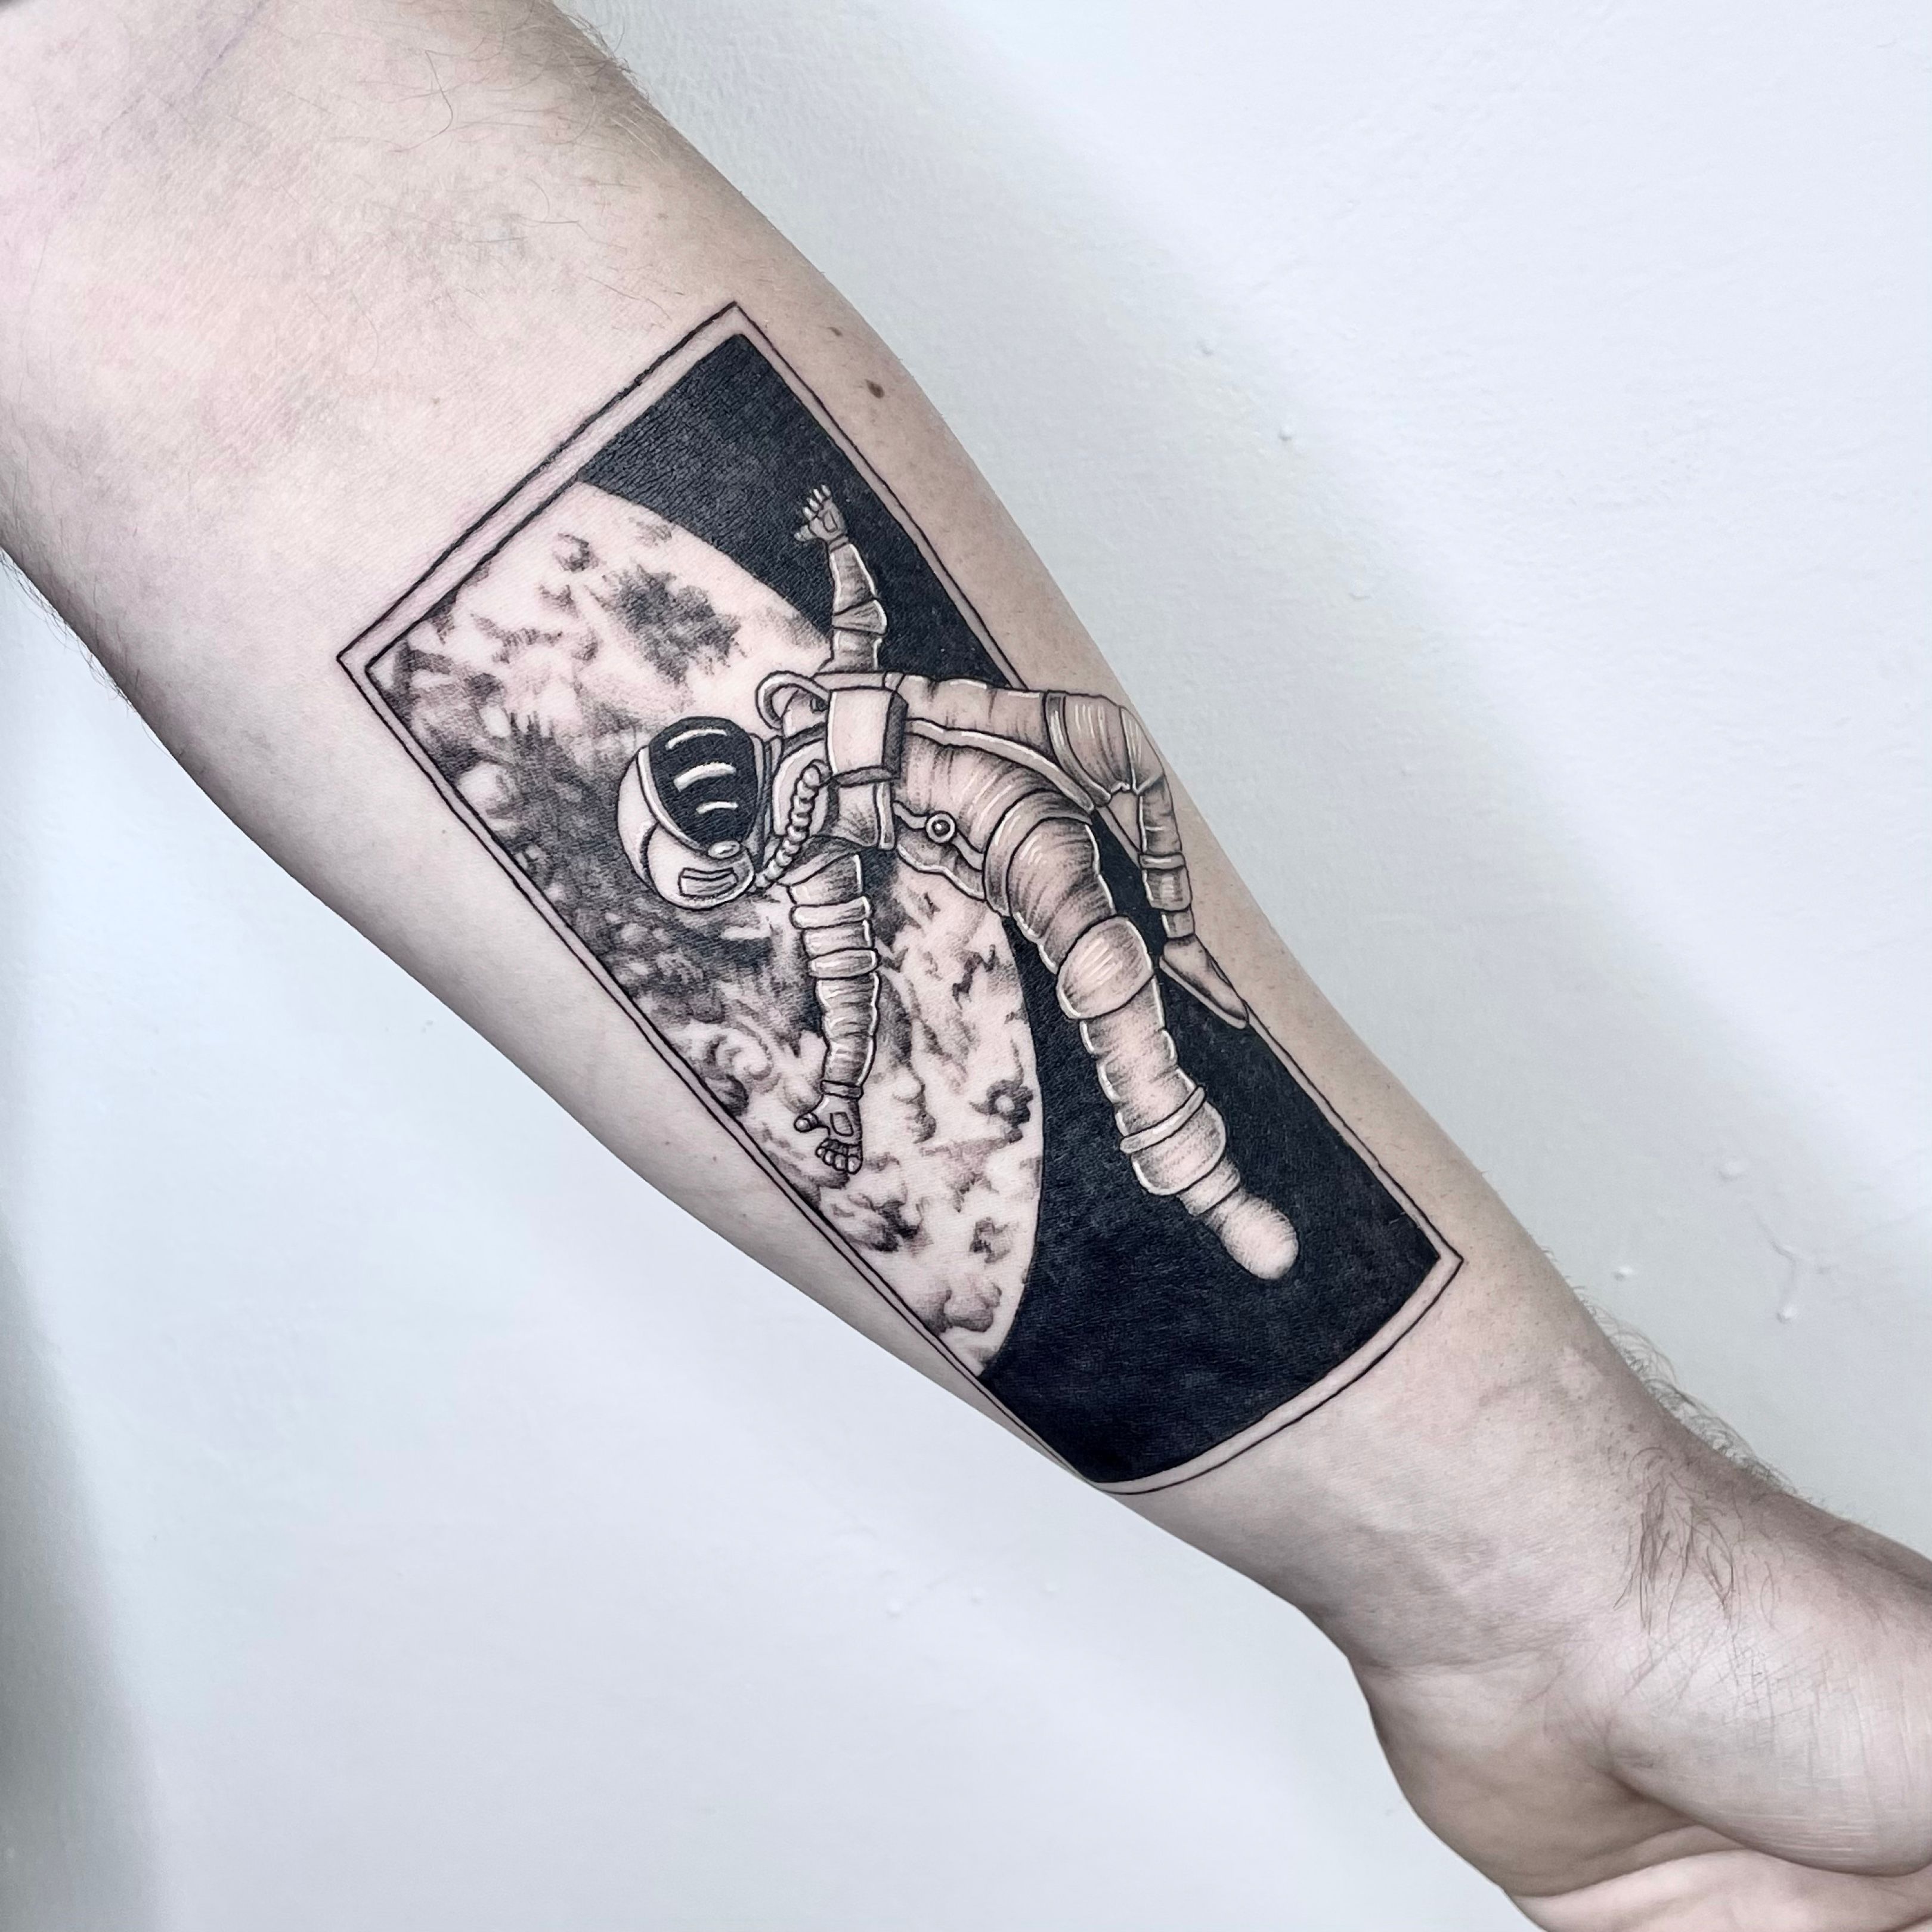 Tattoo uploaded by minerva • Skeleton Astronaut Tattoo by Karrie Arthurs  @ThePaperweight #ThePaperWeight #KarrieArthurs #Black #Blackwork #Dotwork # Skeleton #Astronaut #Blackbirdelectrictattoo • Tattoodo